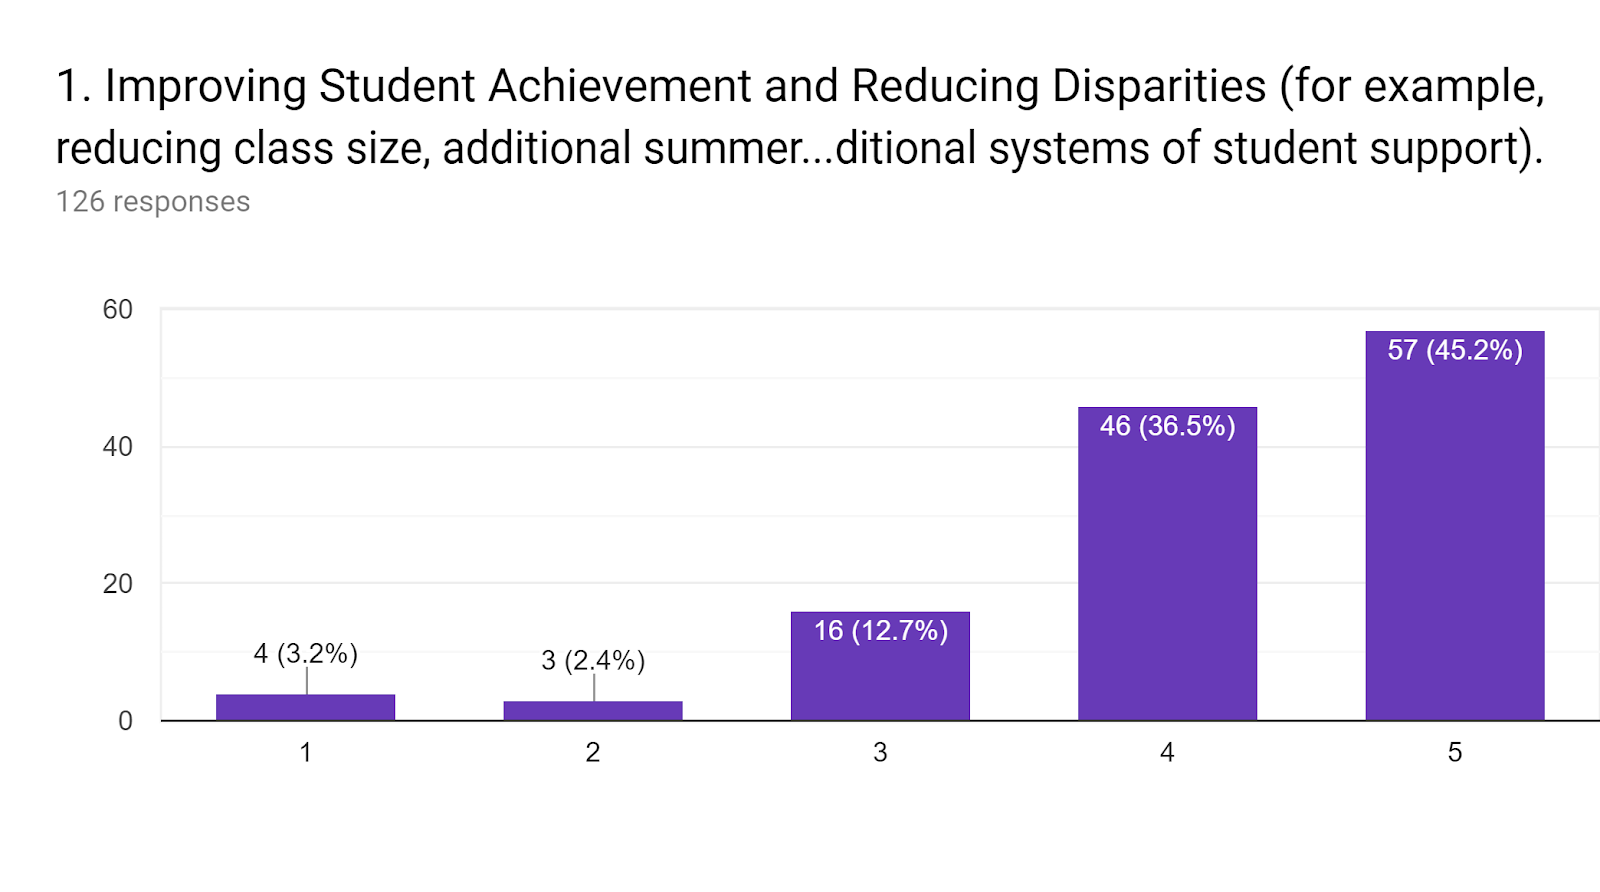 Forms response chart. Question title: 1.	Improving Student Achievement and Reducing Disparities (for example, reducing class size, additional summer learning opportunities, additional systems of student support).. Number of responses: 126 responses.